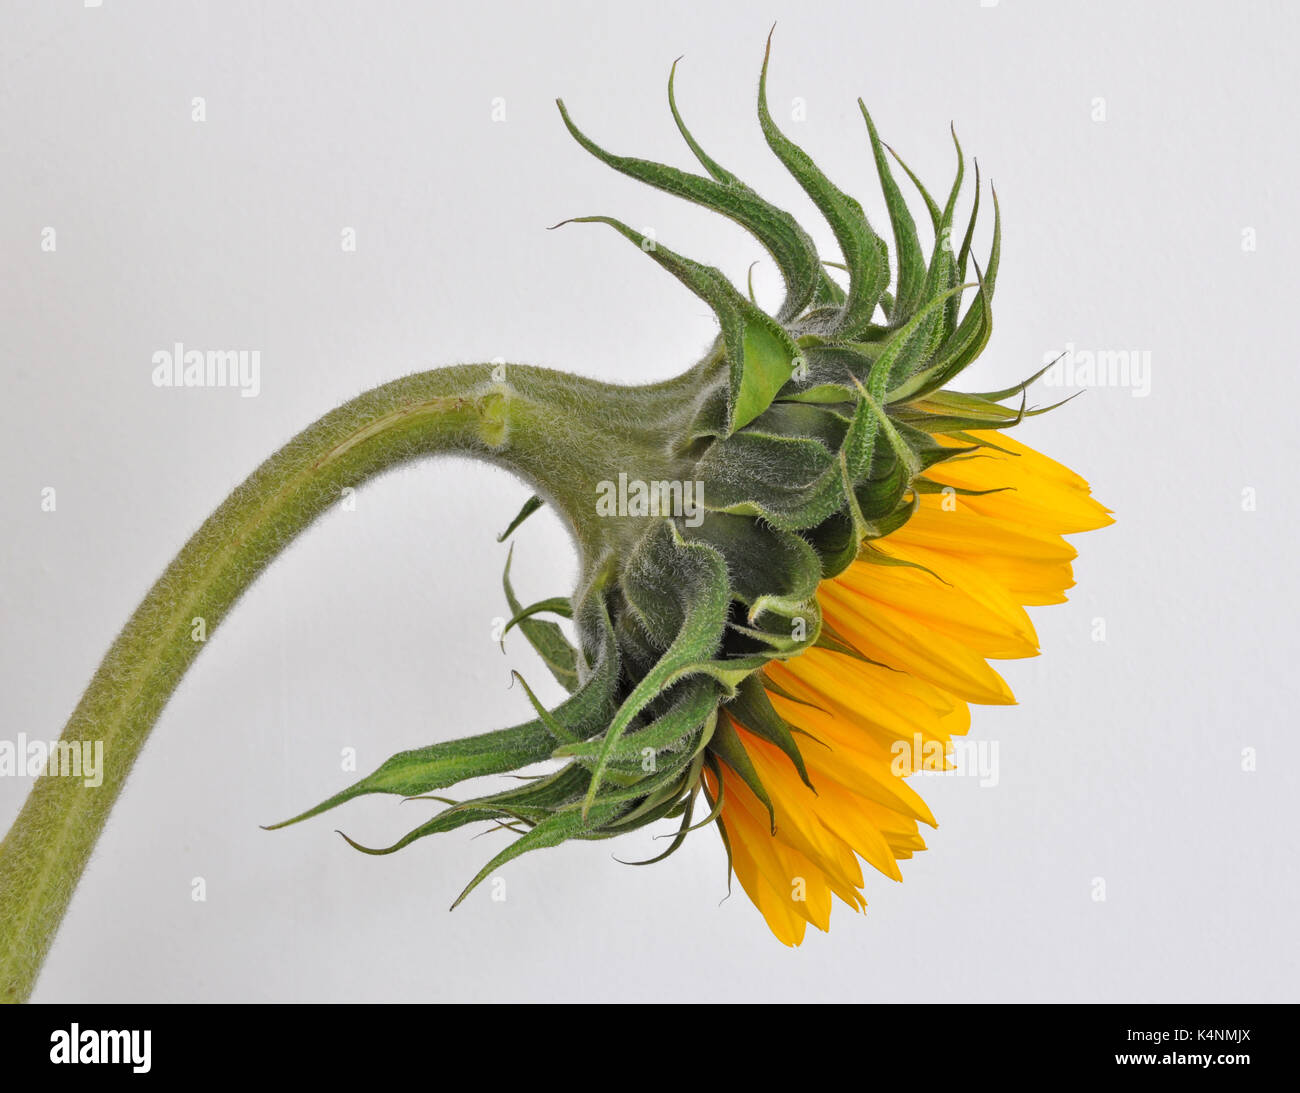 Sunflower profile on a white background Stock Photo